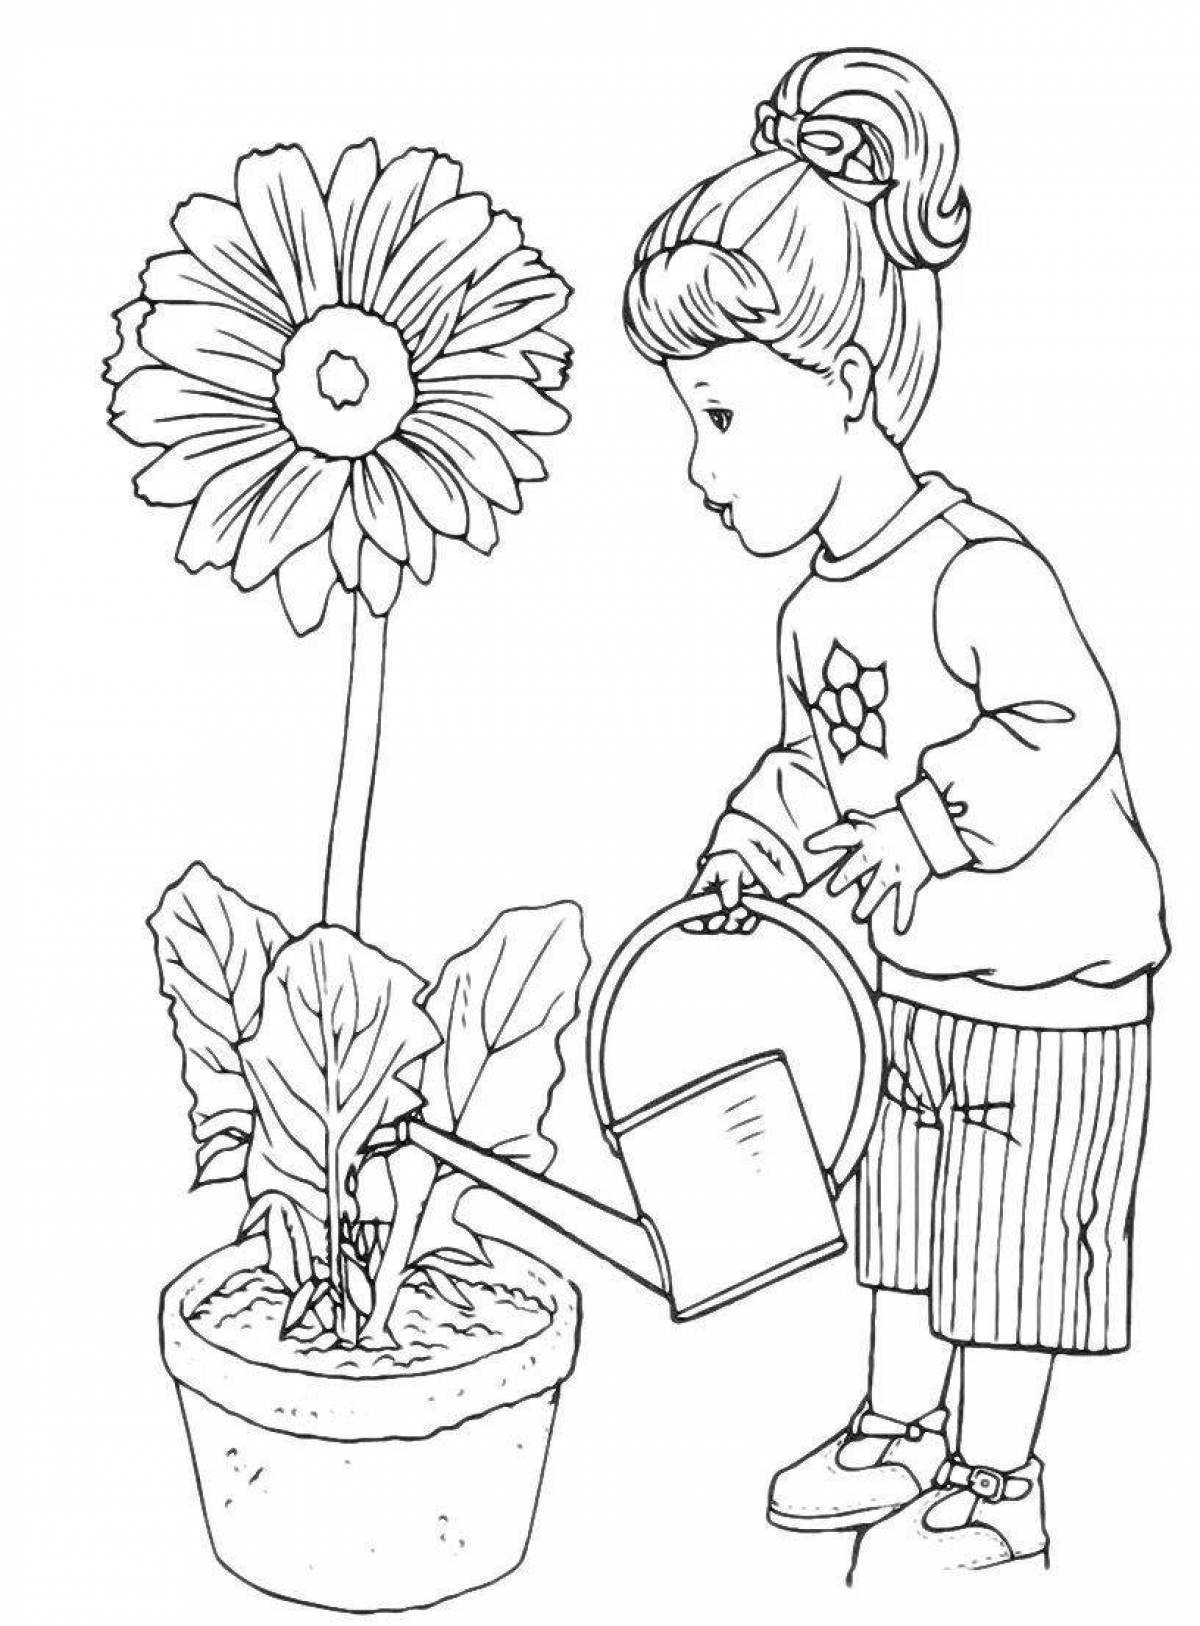 Houseplant care for kids #7